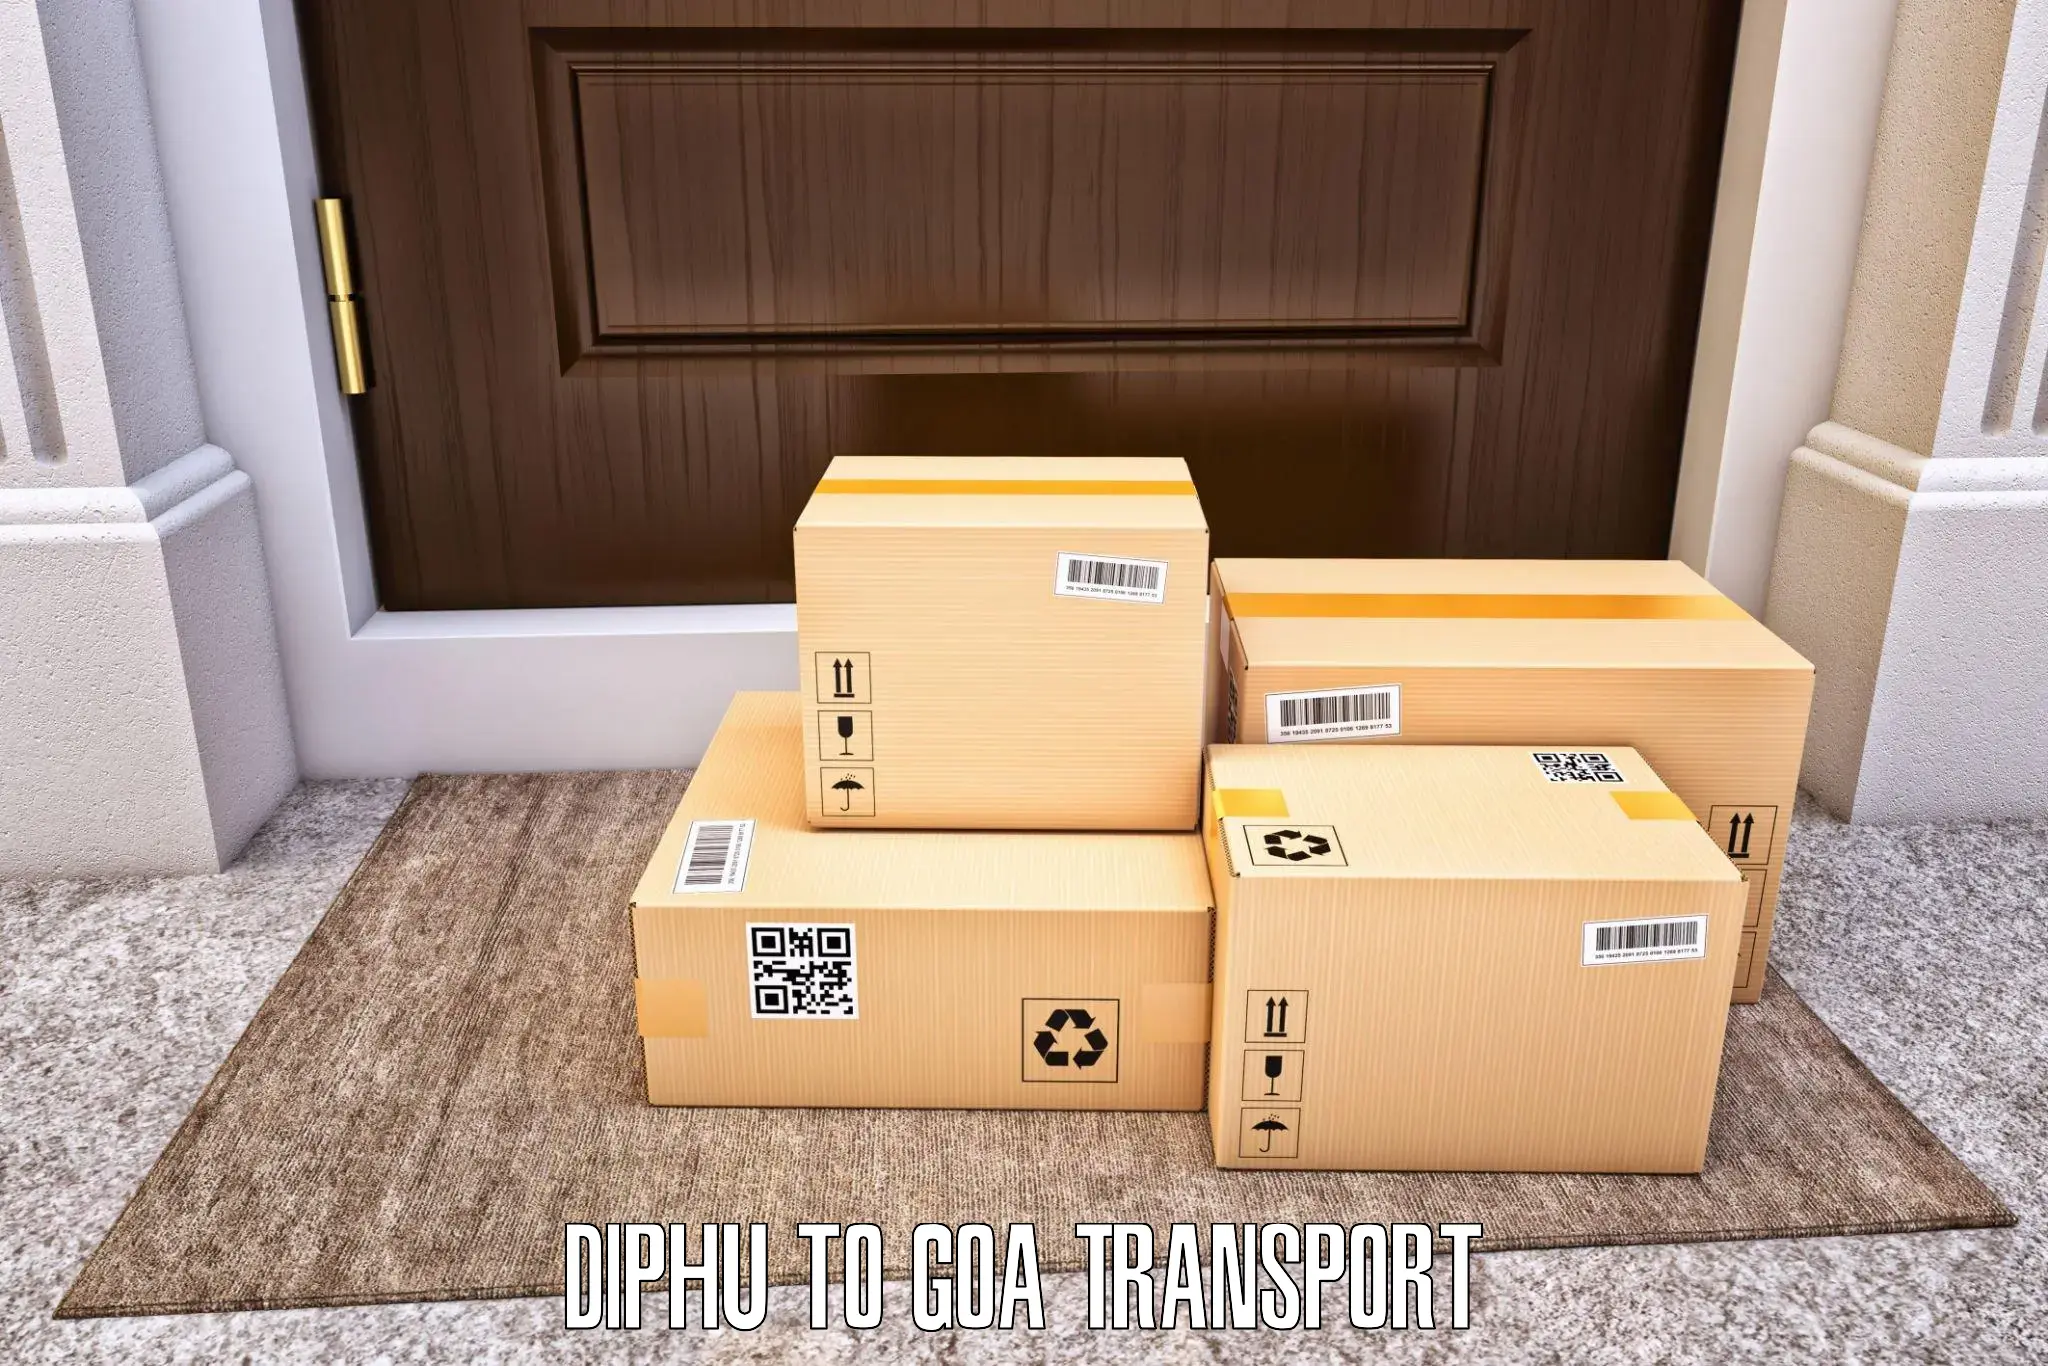 Part load transport service in India Diphu to Goa